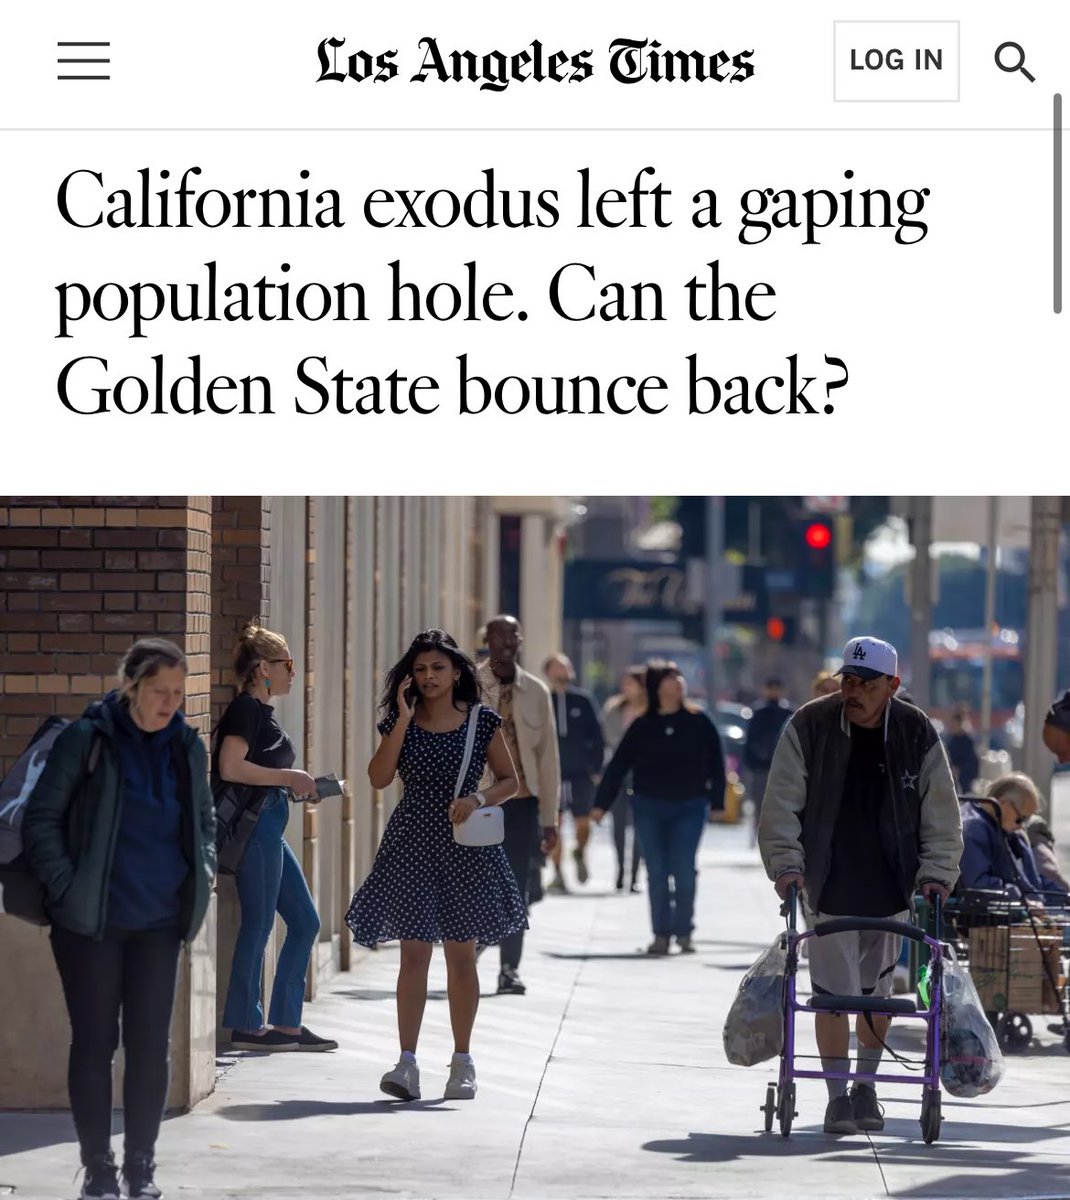 Unfortunately for Gavin Newsom even the Los Angeles Times is running with Fox News’ “myth” of the great exodus of California.